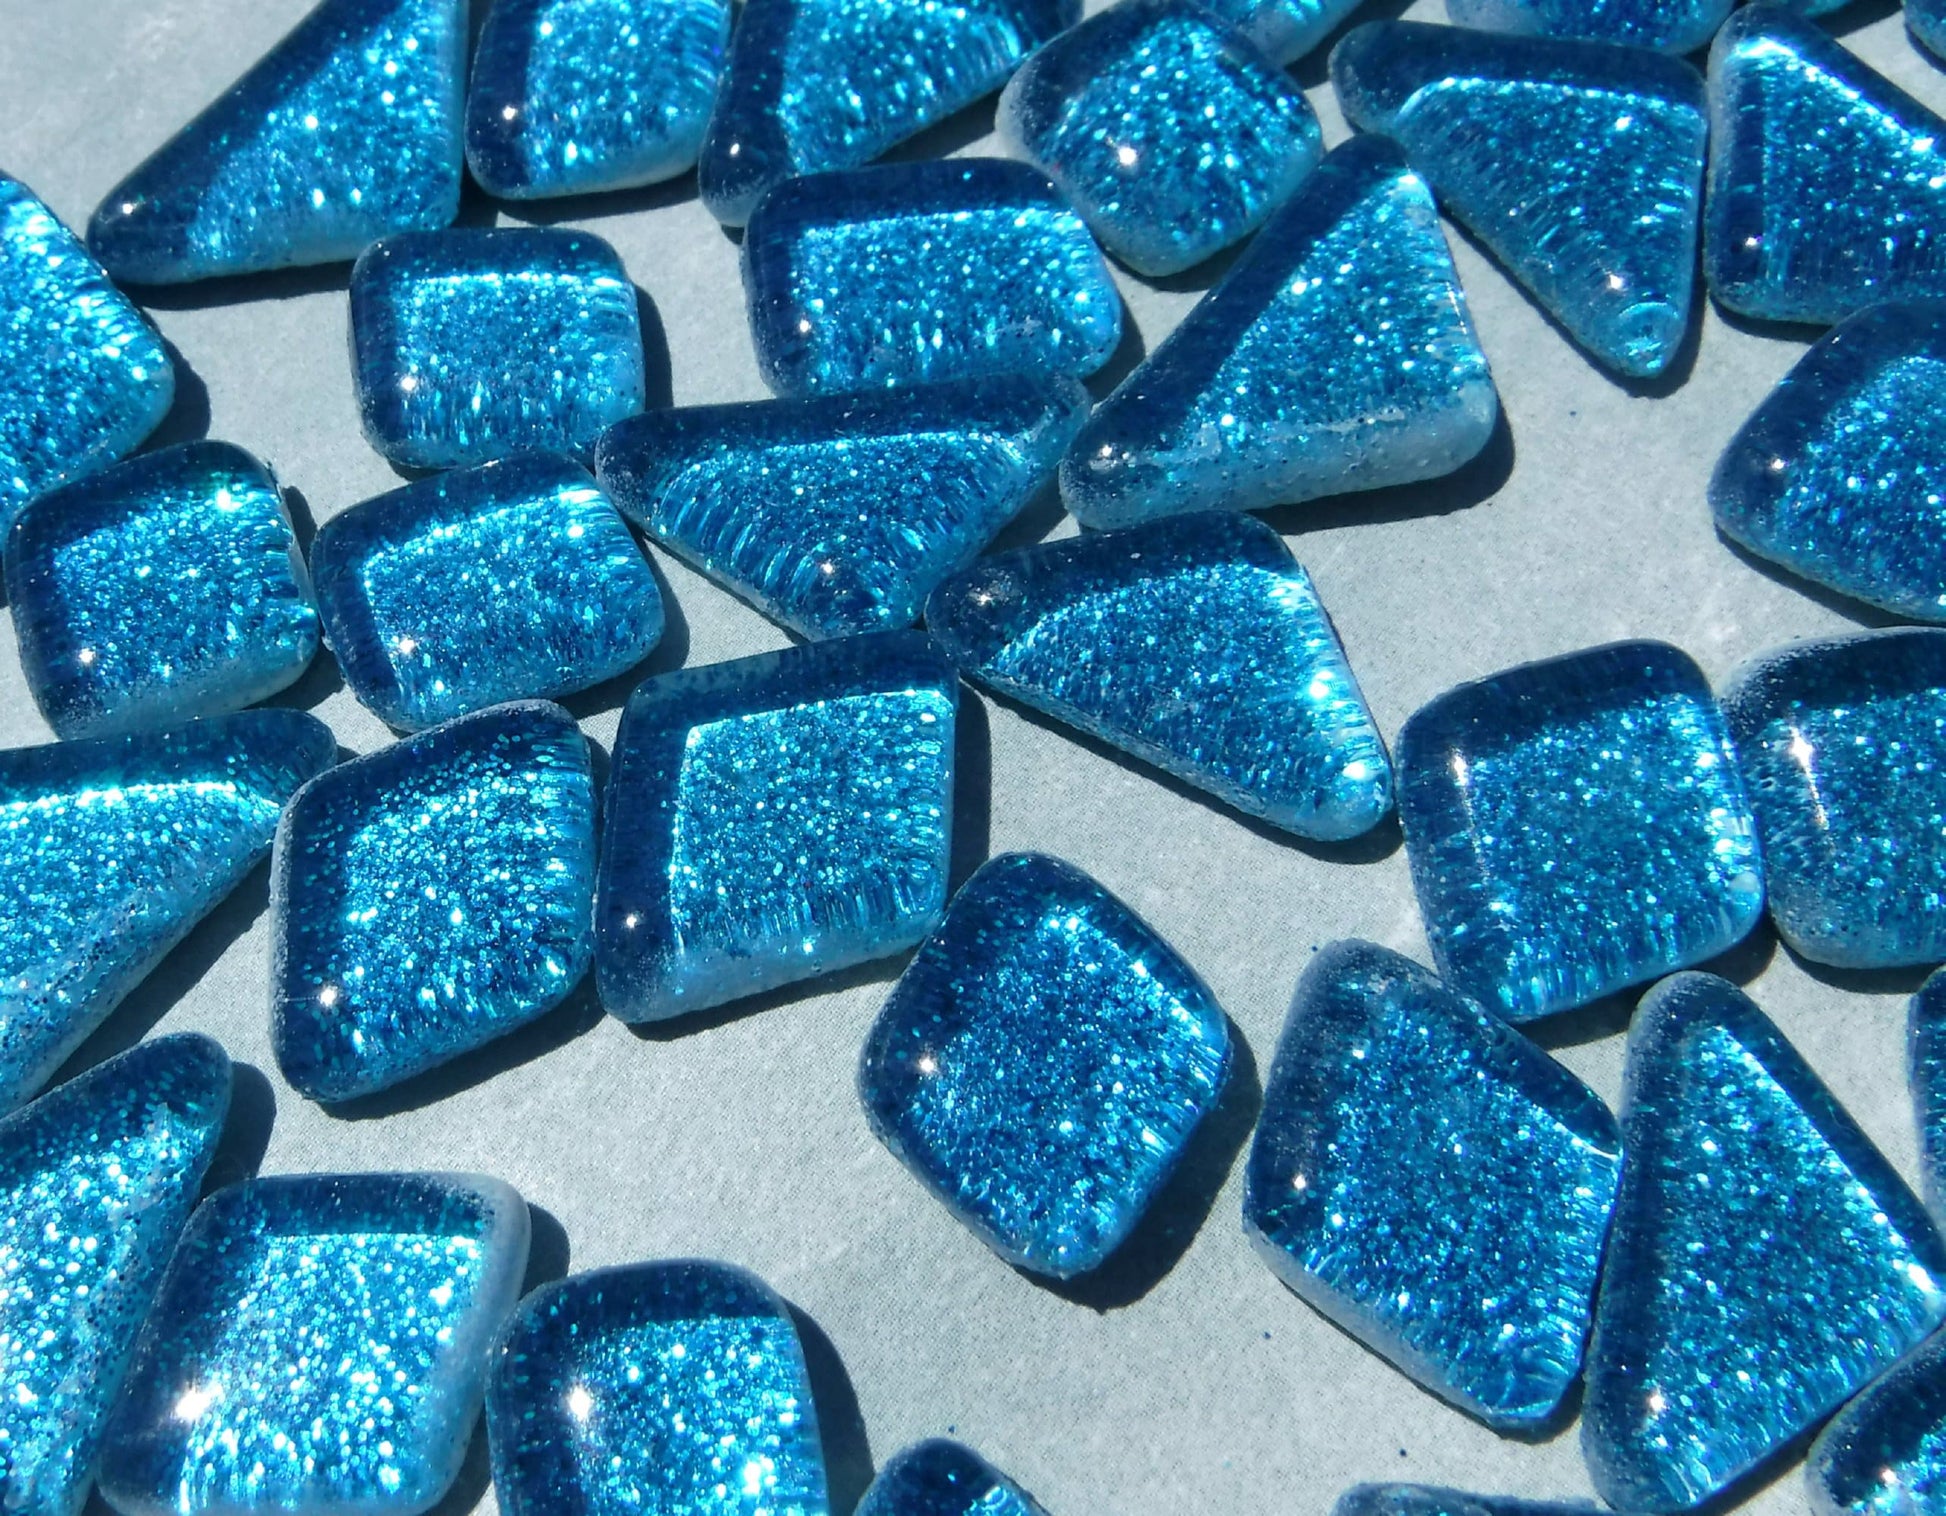 Sky Blue Glitter Puzzle Tiles - 100 grams in Assorted Shapes Glass Mosaic Tiles